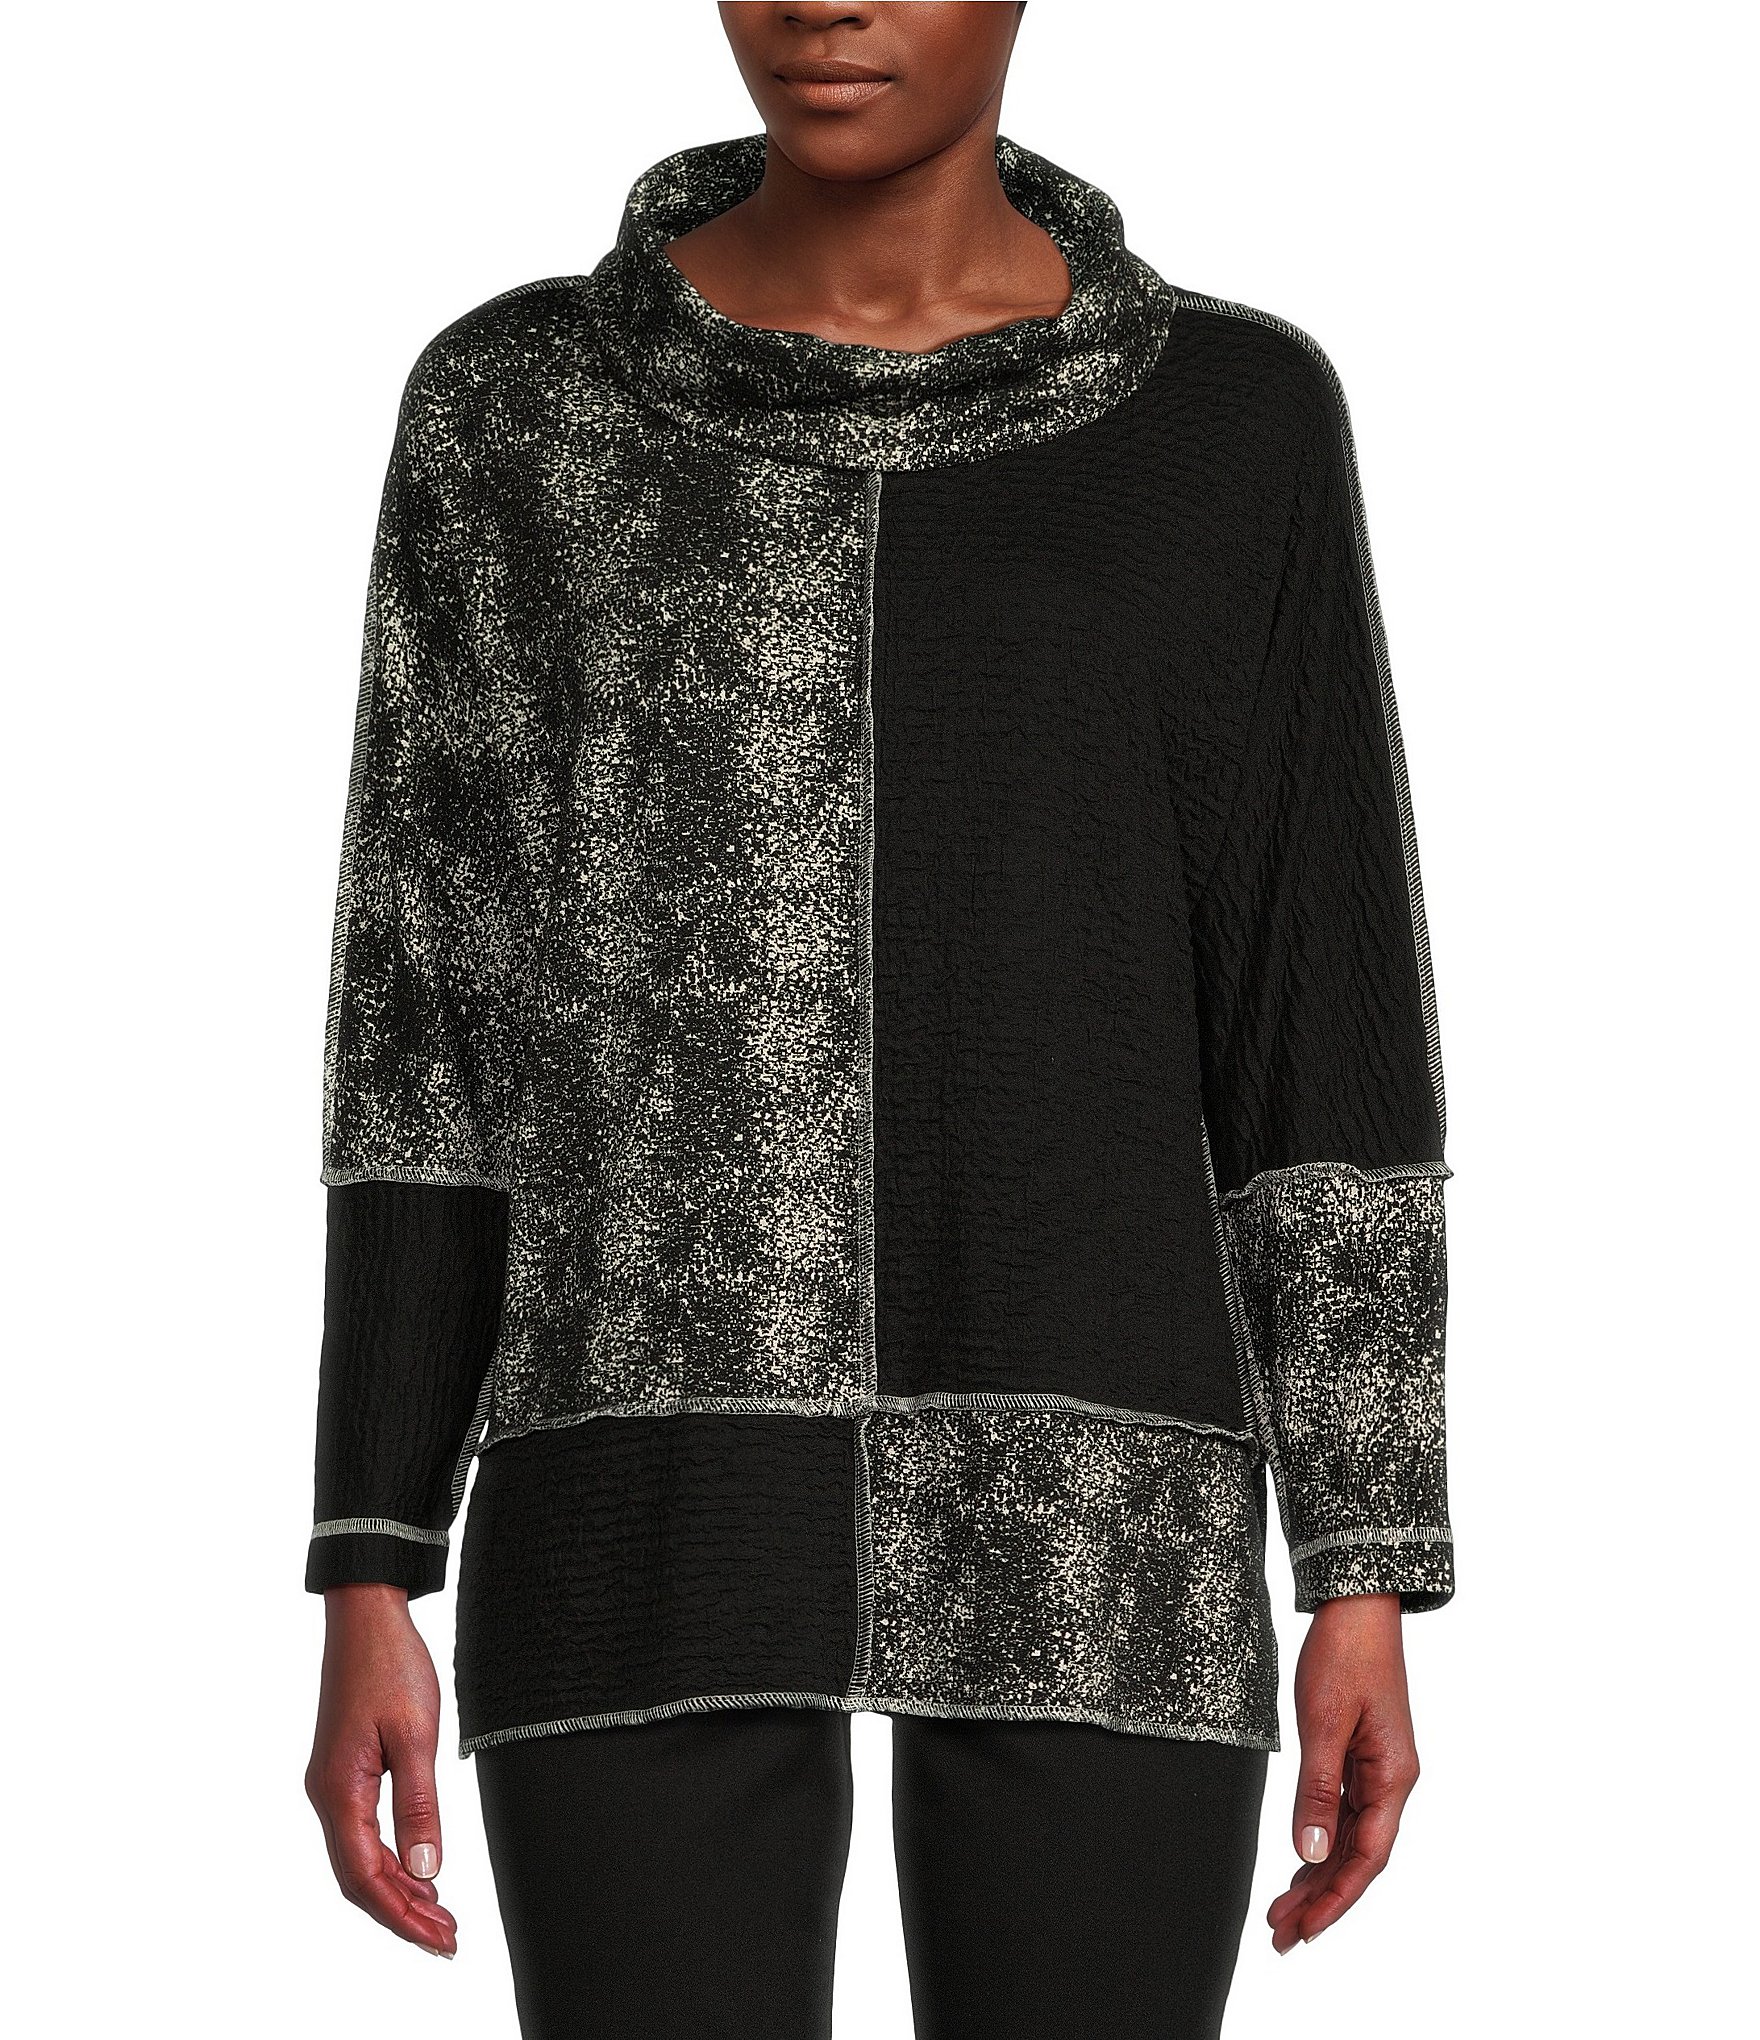 Ali Miles Color Block Jacquard Knit Cowl Neck Long Ripped Cuffed